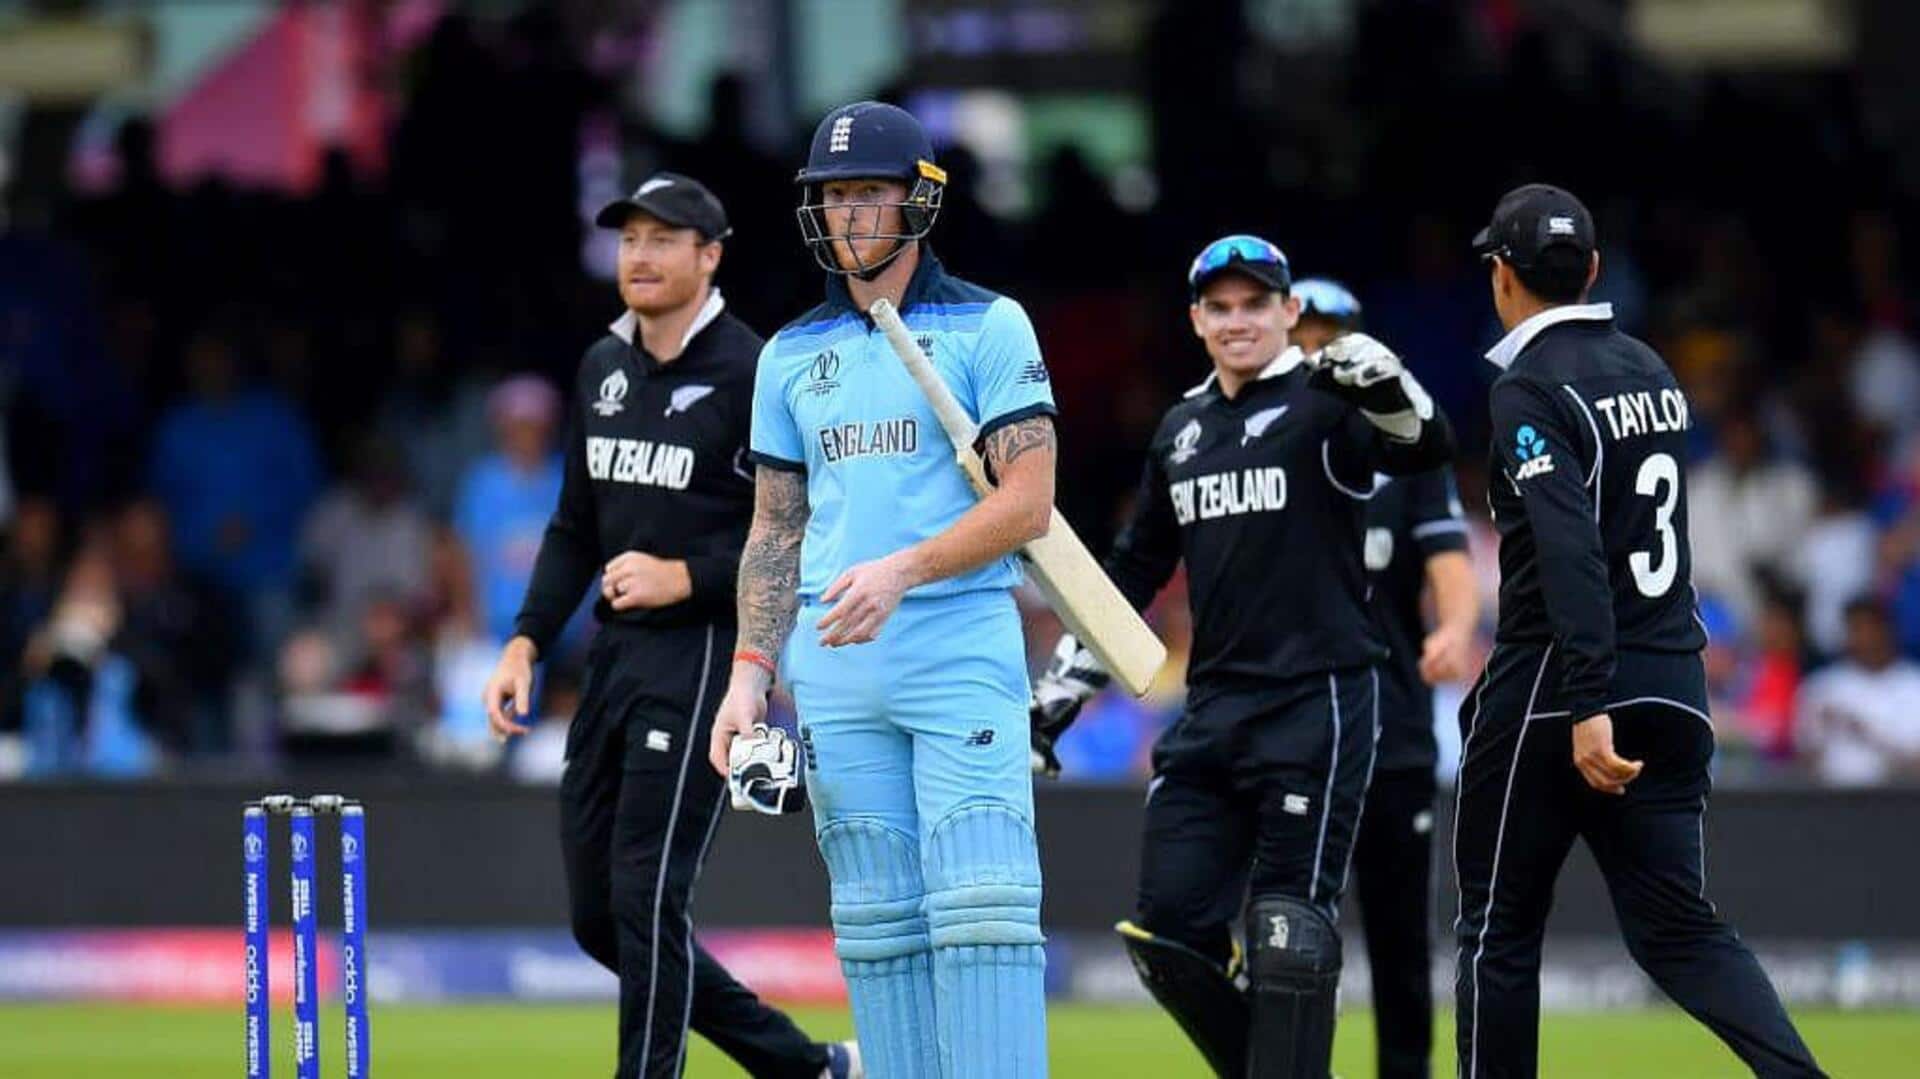 Iconic England vs New Zealand matches at ODI World Cups